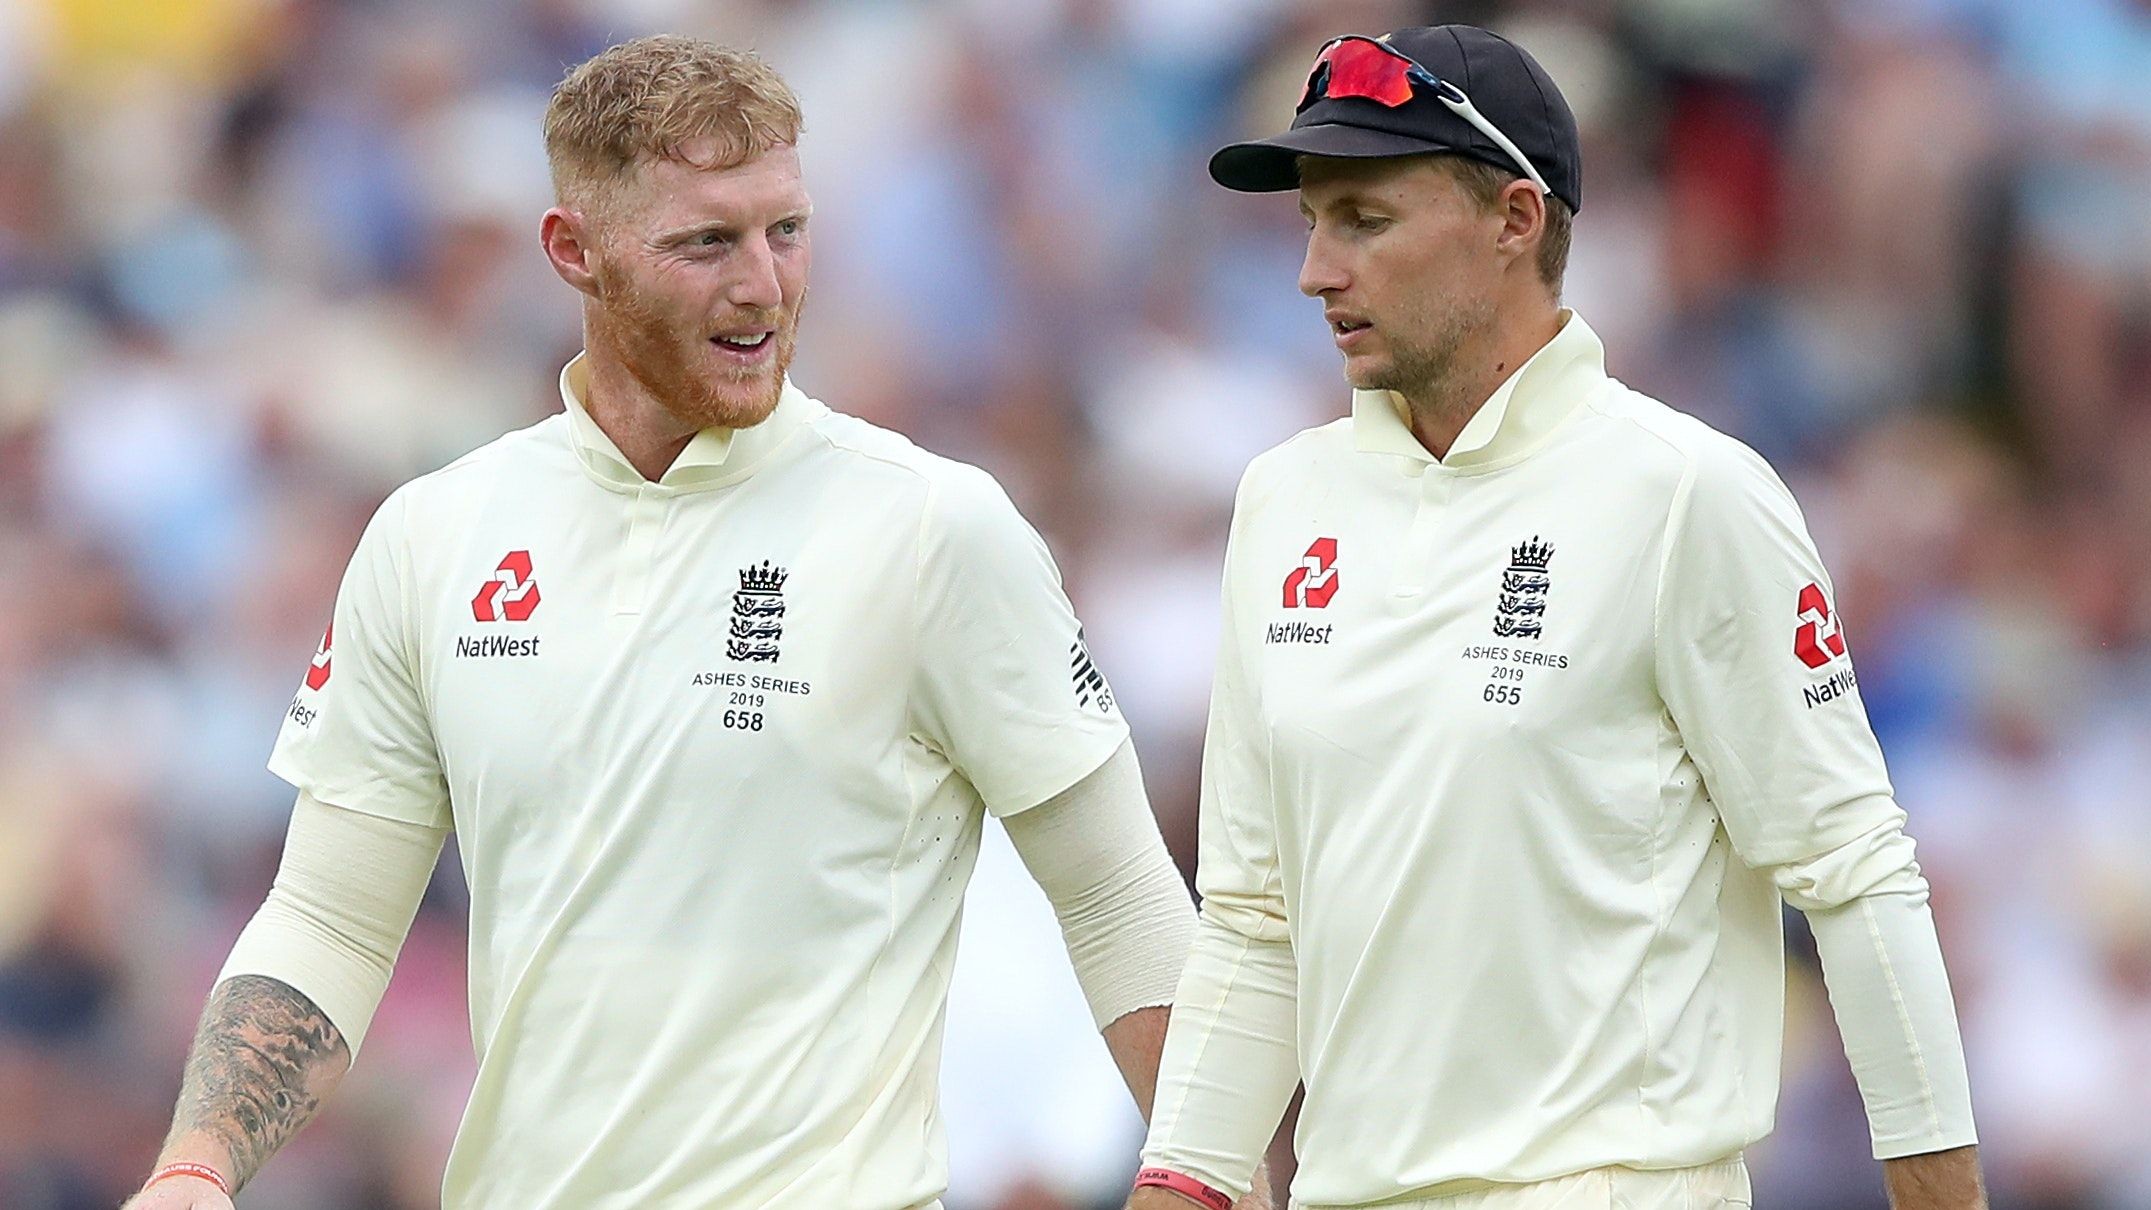 ENG v WI 2020: Joe Root in awe of 'Mr. Incredible' Ben Stokes after latter’s heroics at Old Trafford